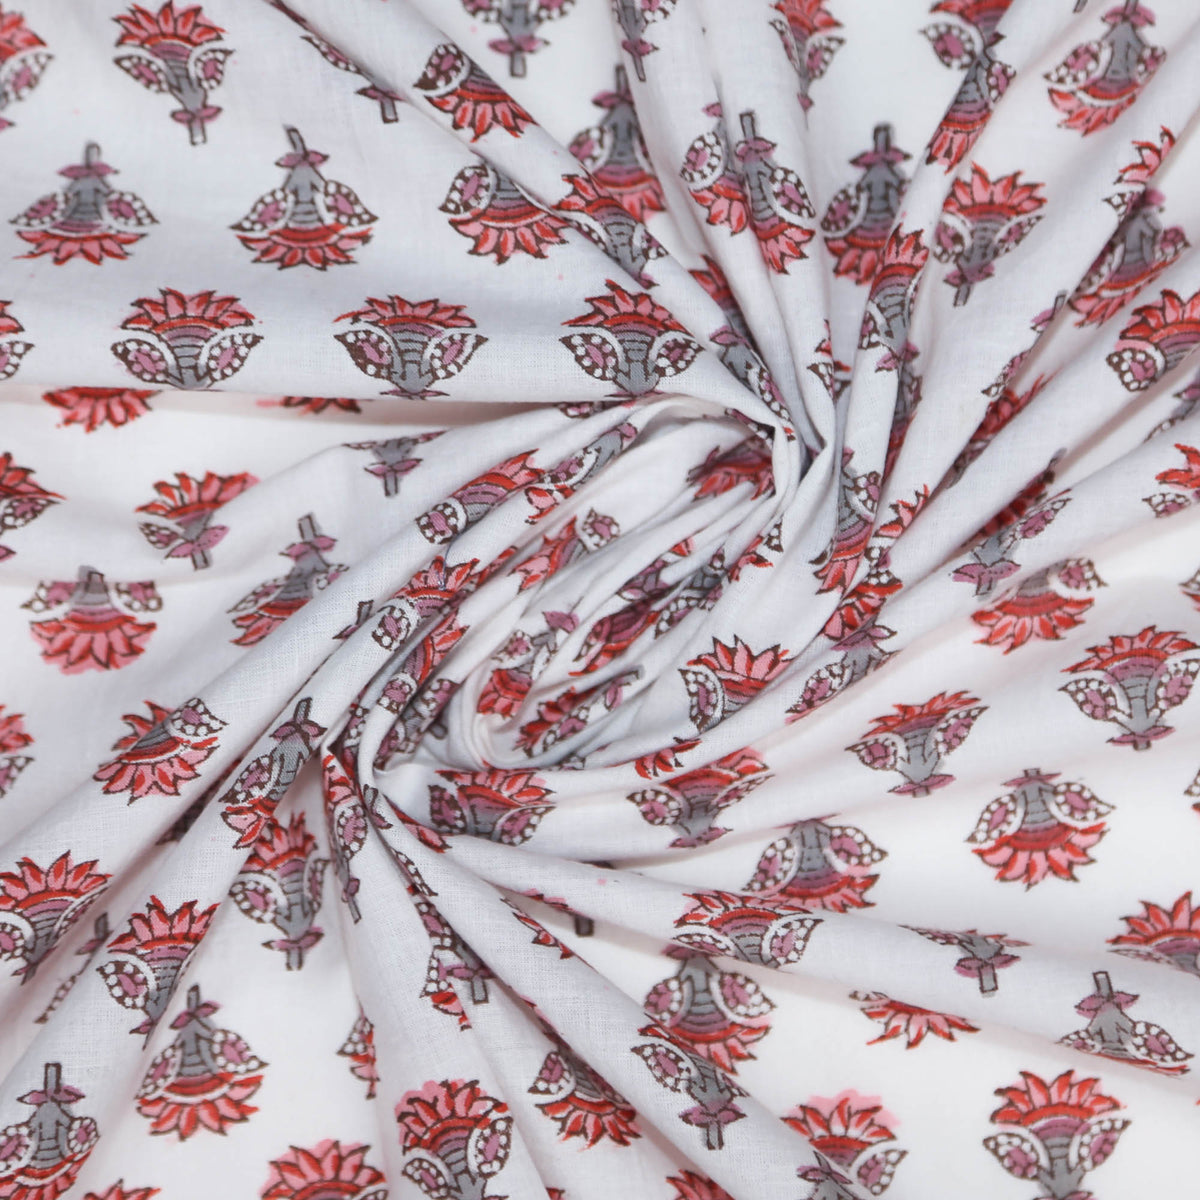 Block Print Fabric - Maroon Small  Floral On White( Design 469)